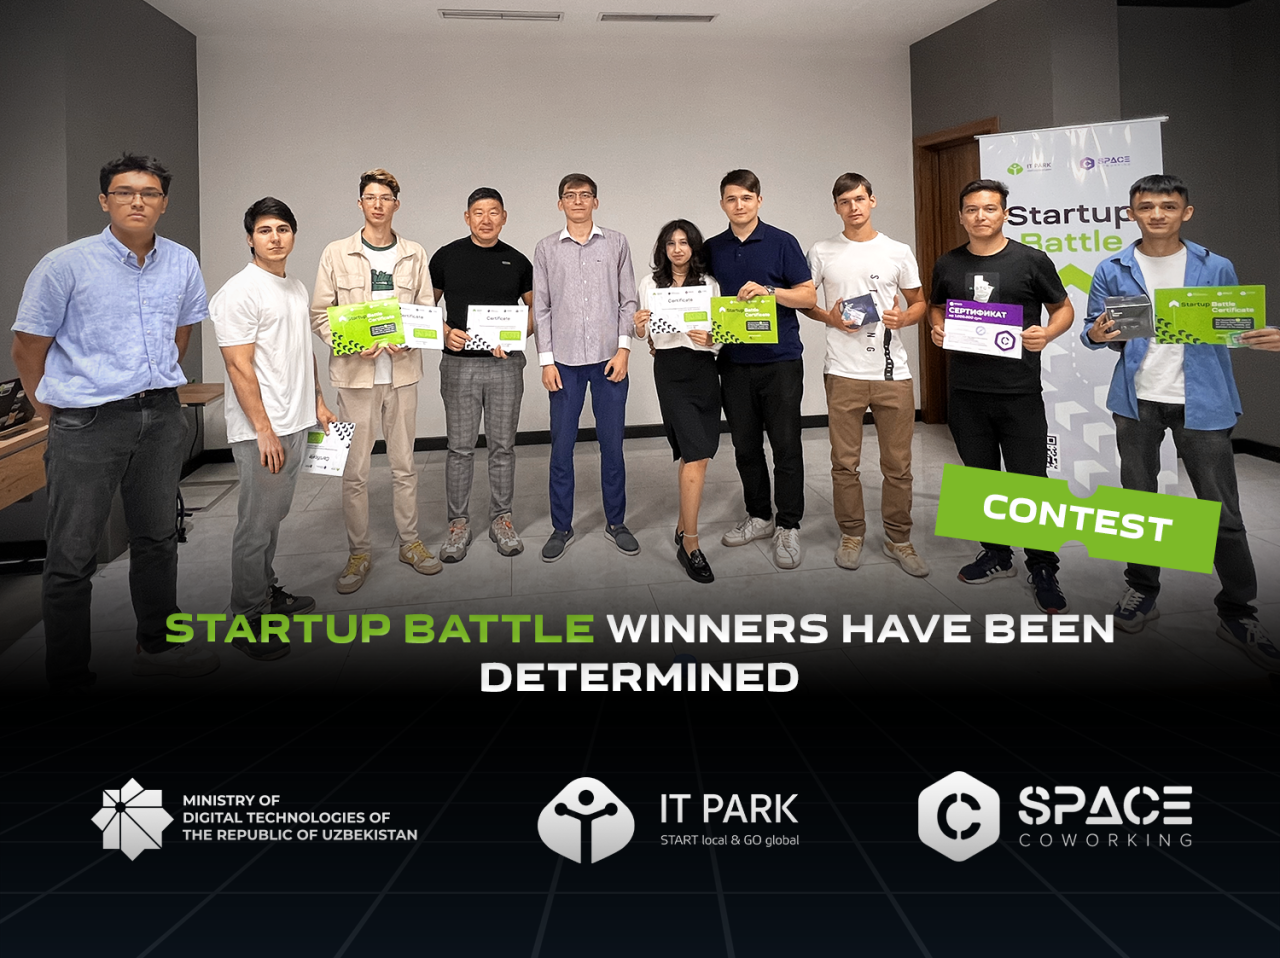 Startup Battle winners have been determined